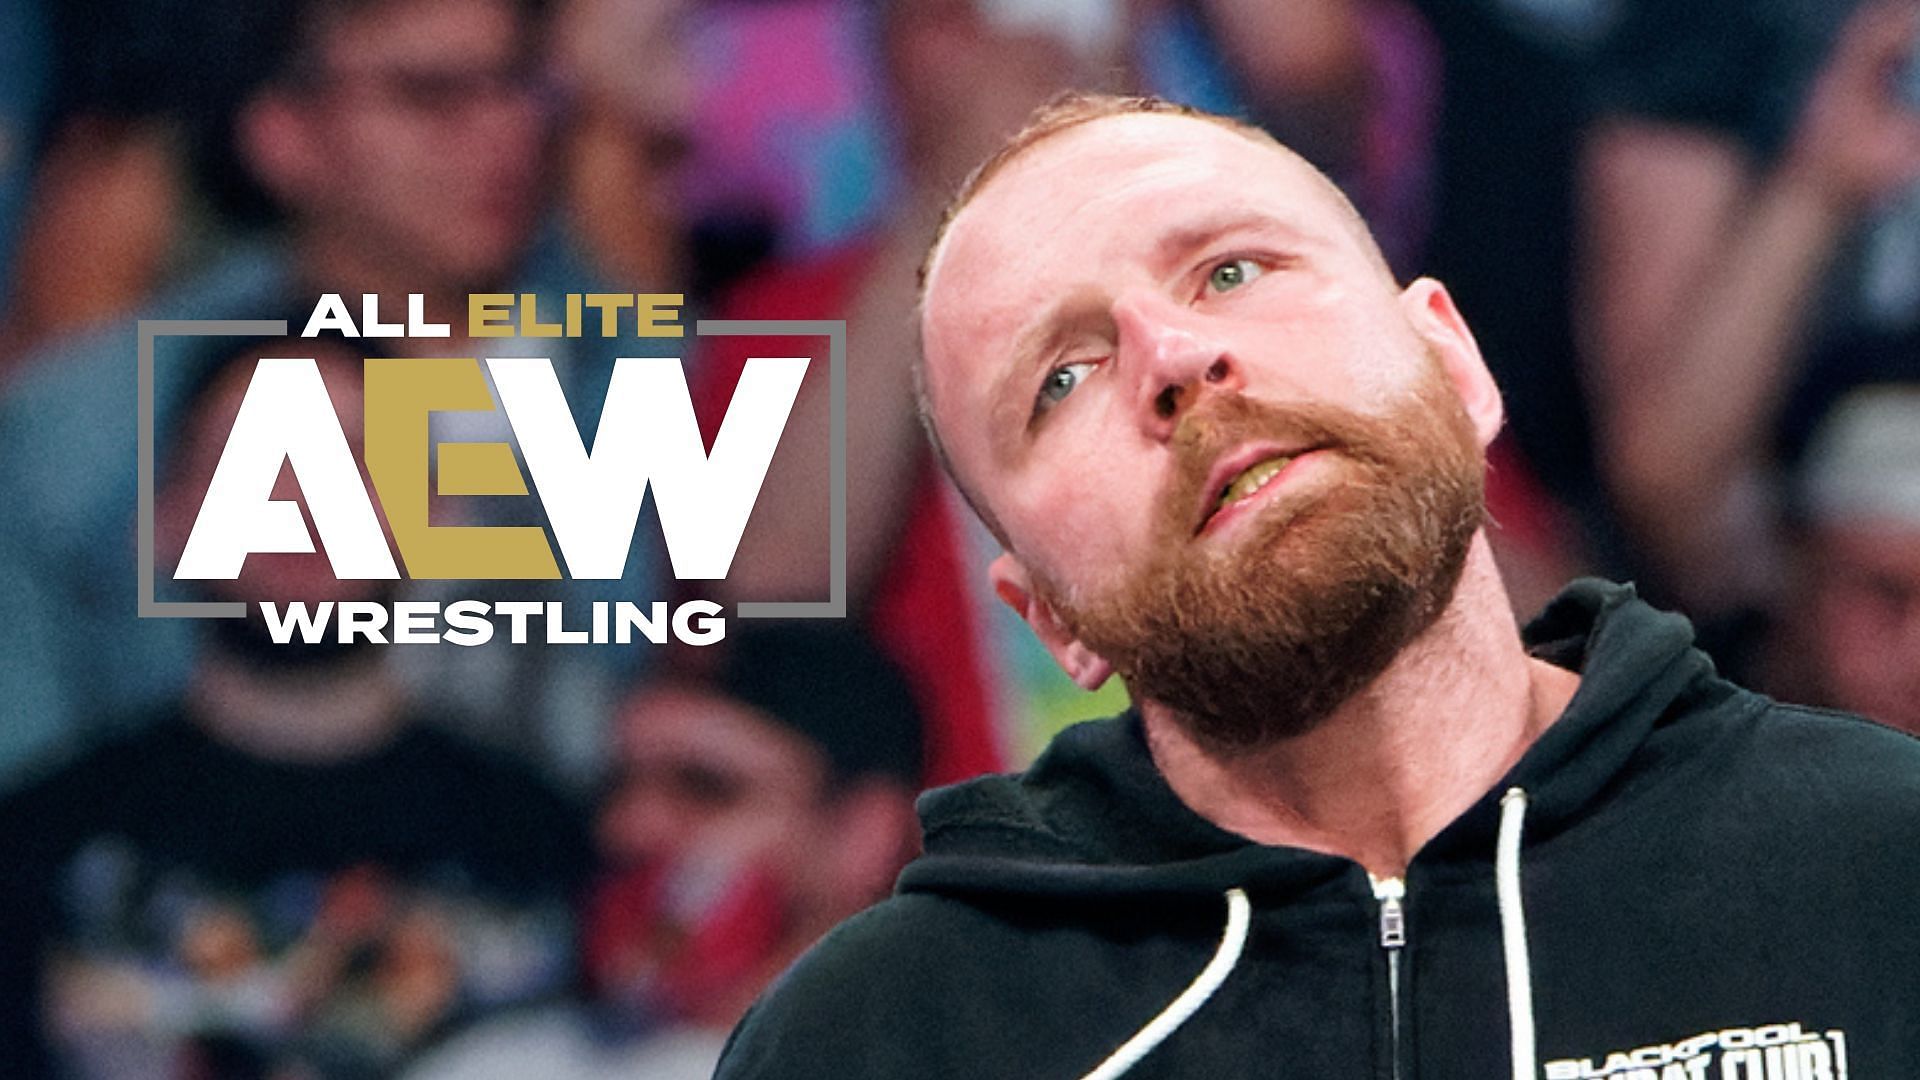 Which match did Jon Moxley refuse to do?